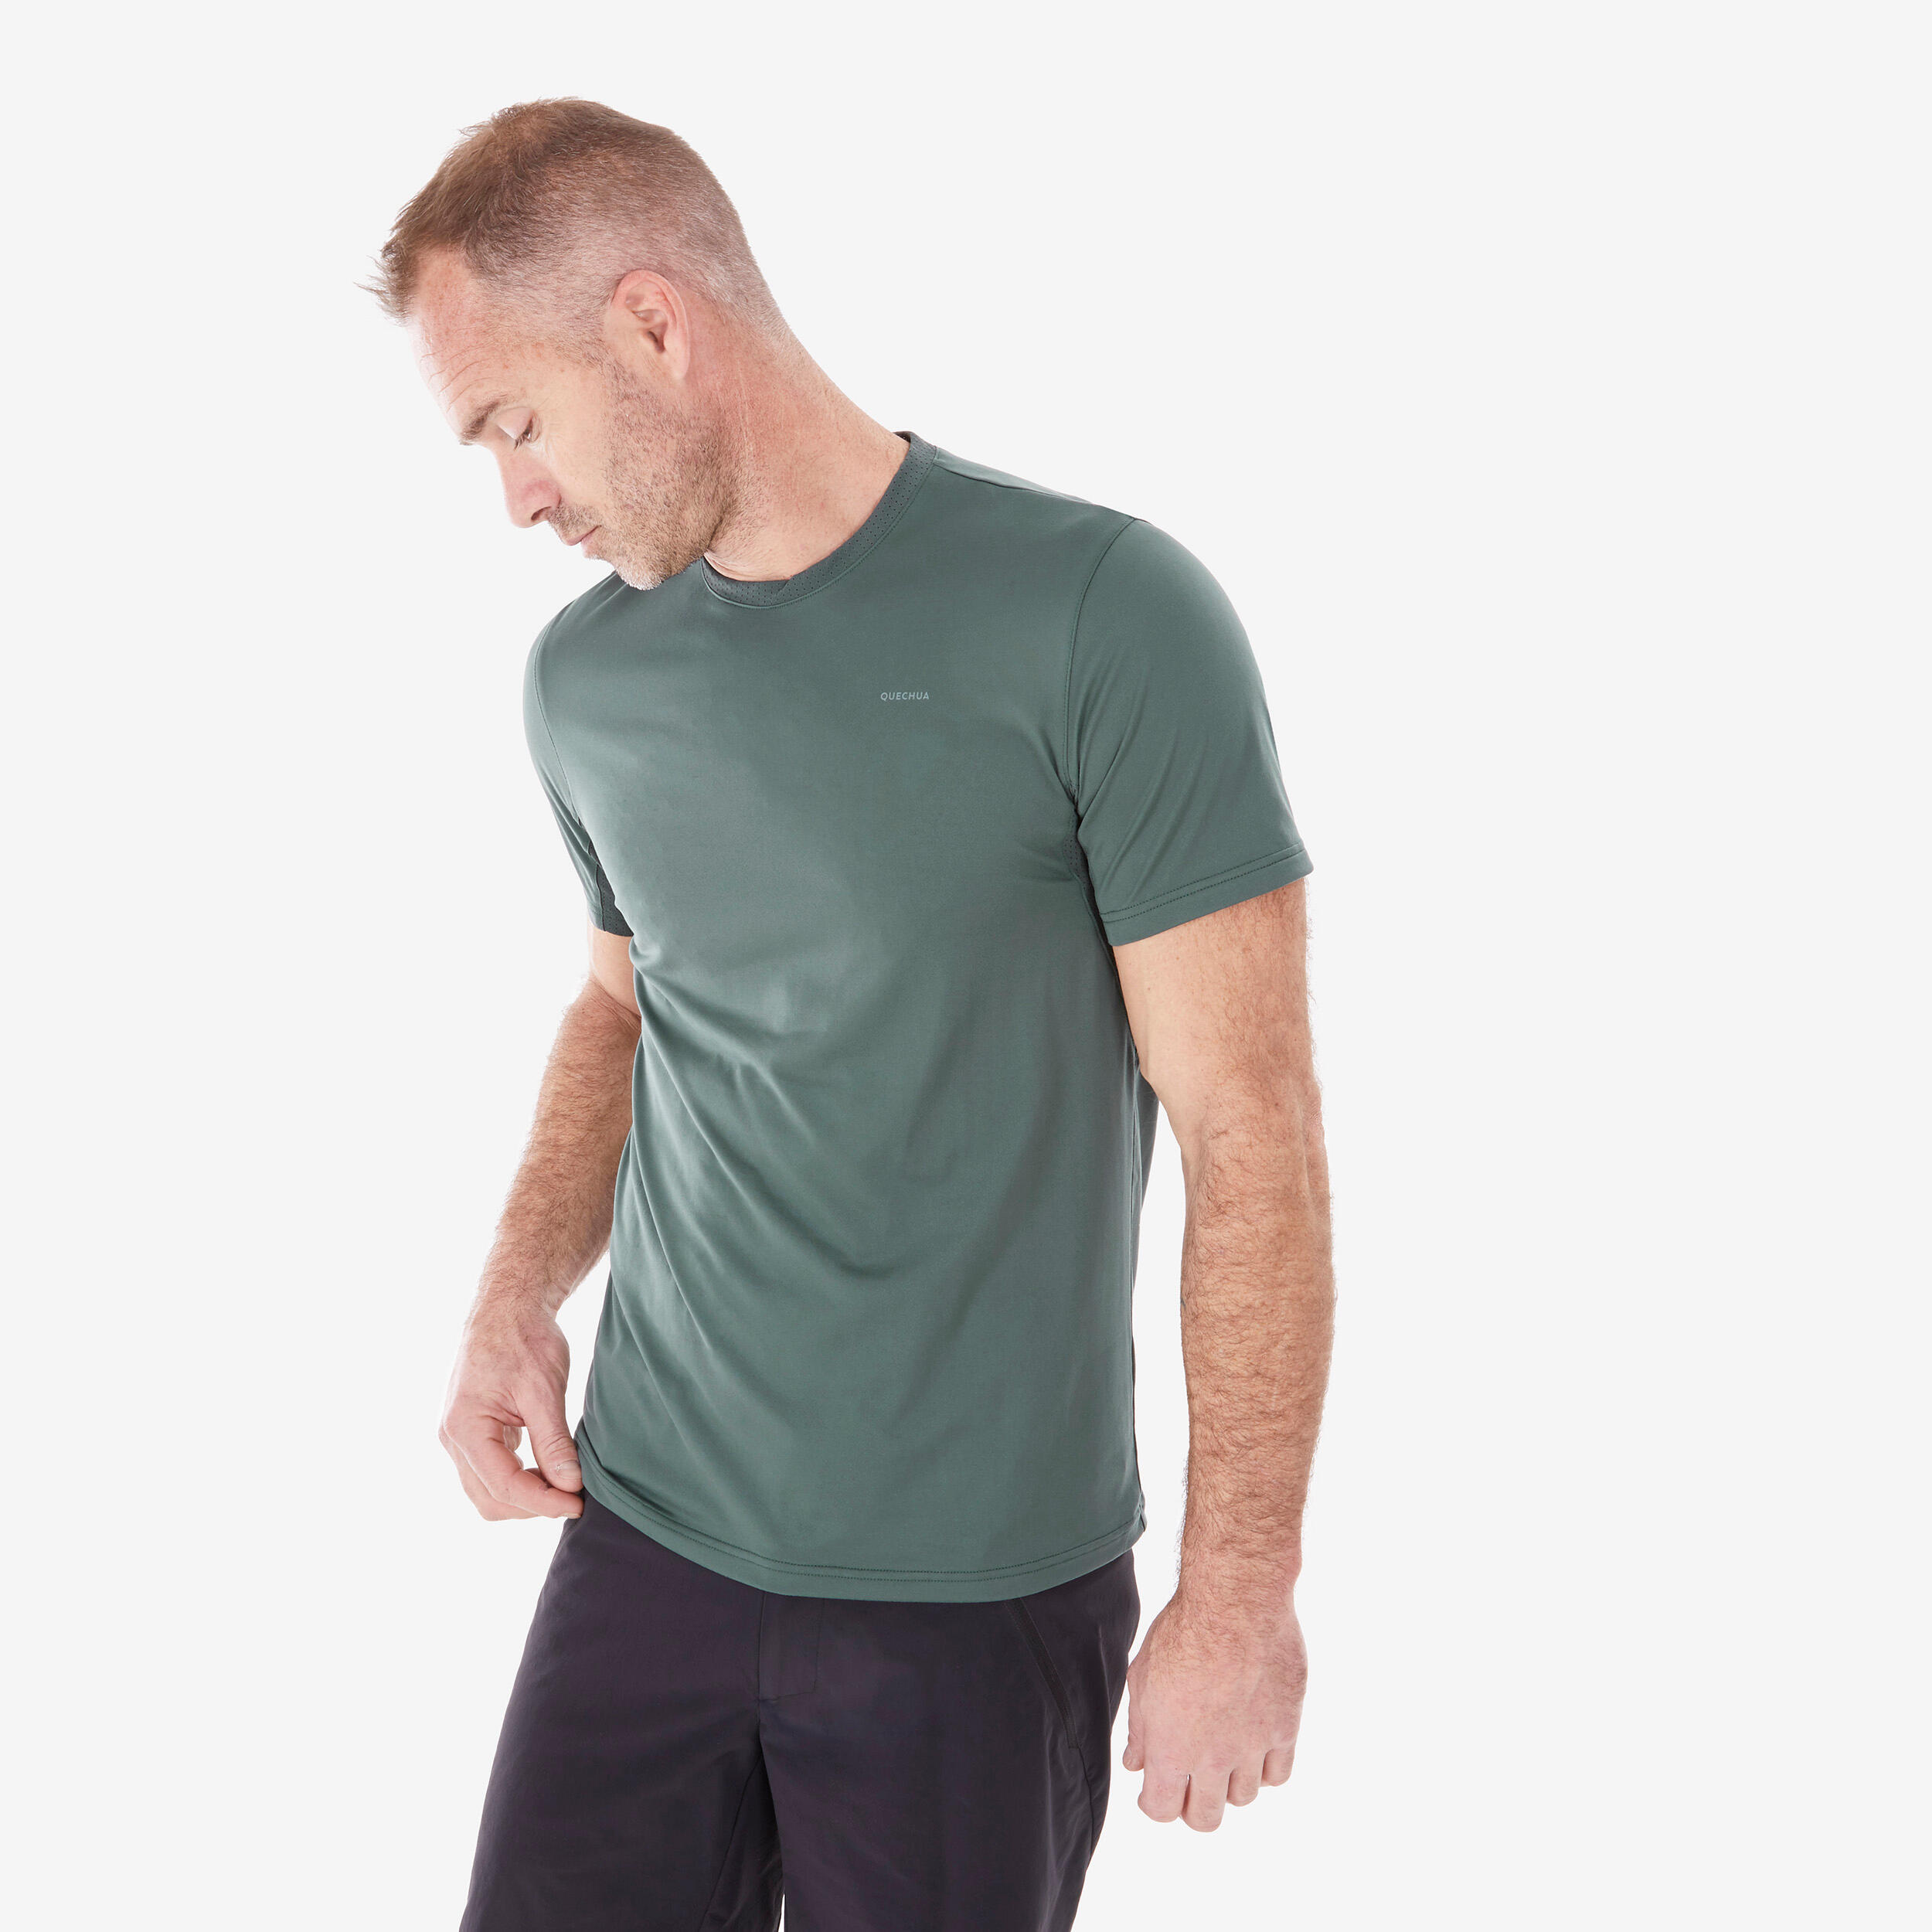 Men's synthetic short-sleeved hiking T-shirt - MH100  1/4